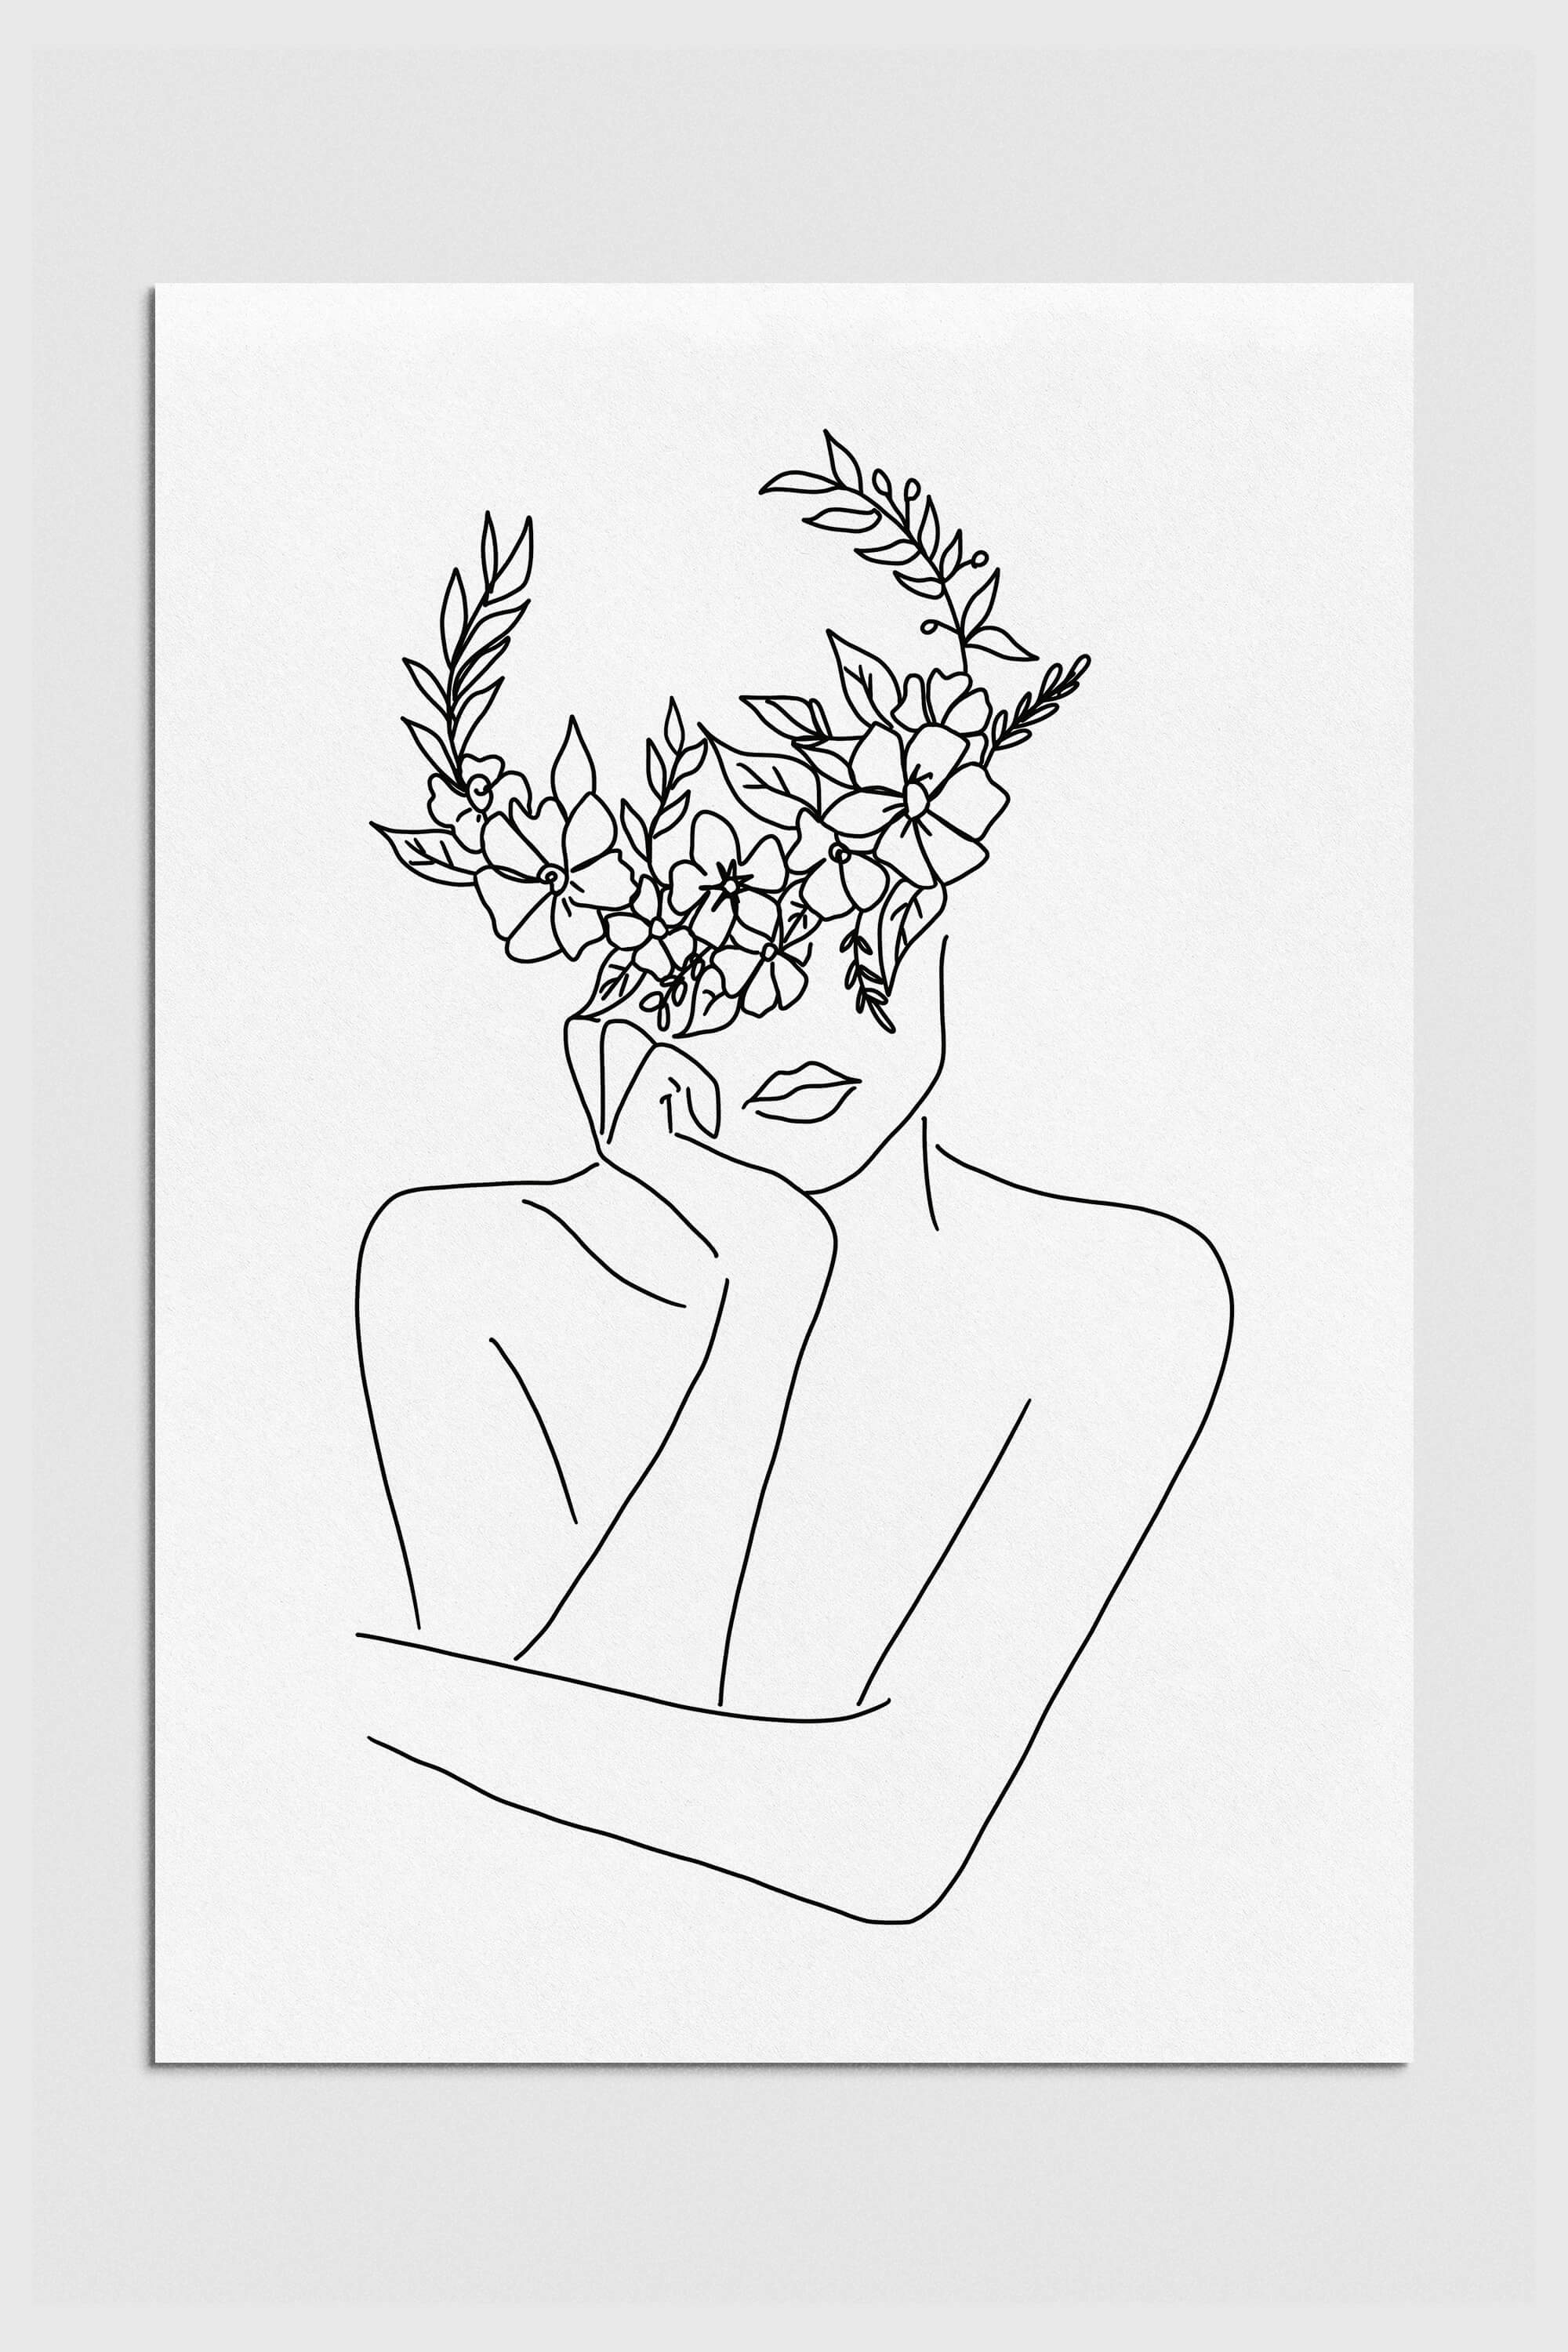 Serene woman in line drawing style, showcasing timeless beauty with an intricate floral crown. Black and white art print exuding elegance and grace.